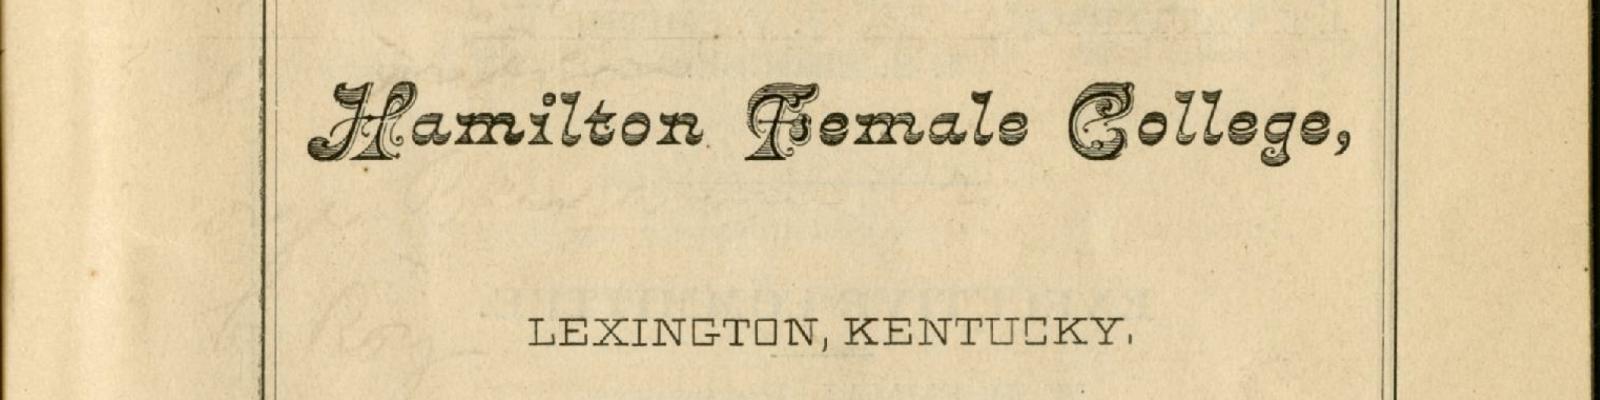 annual catalog of officers and students of Hamilton Female College